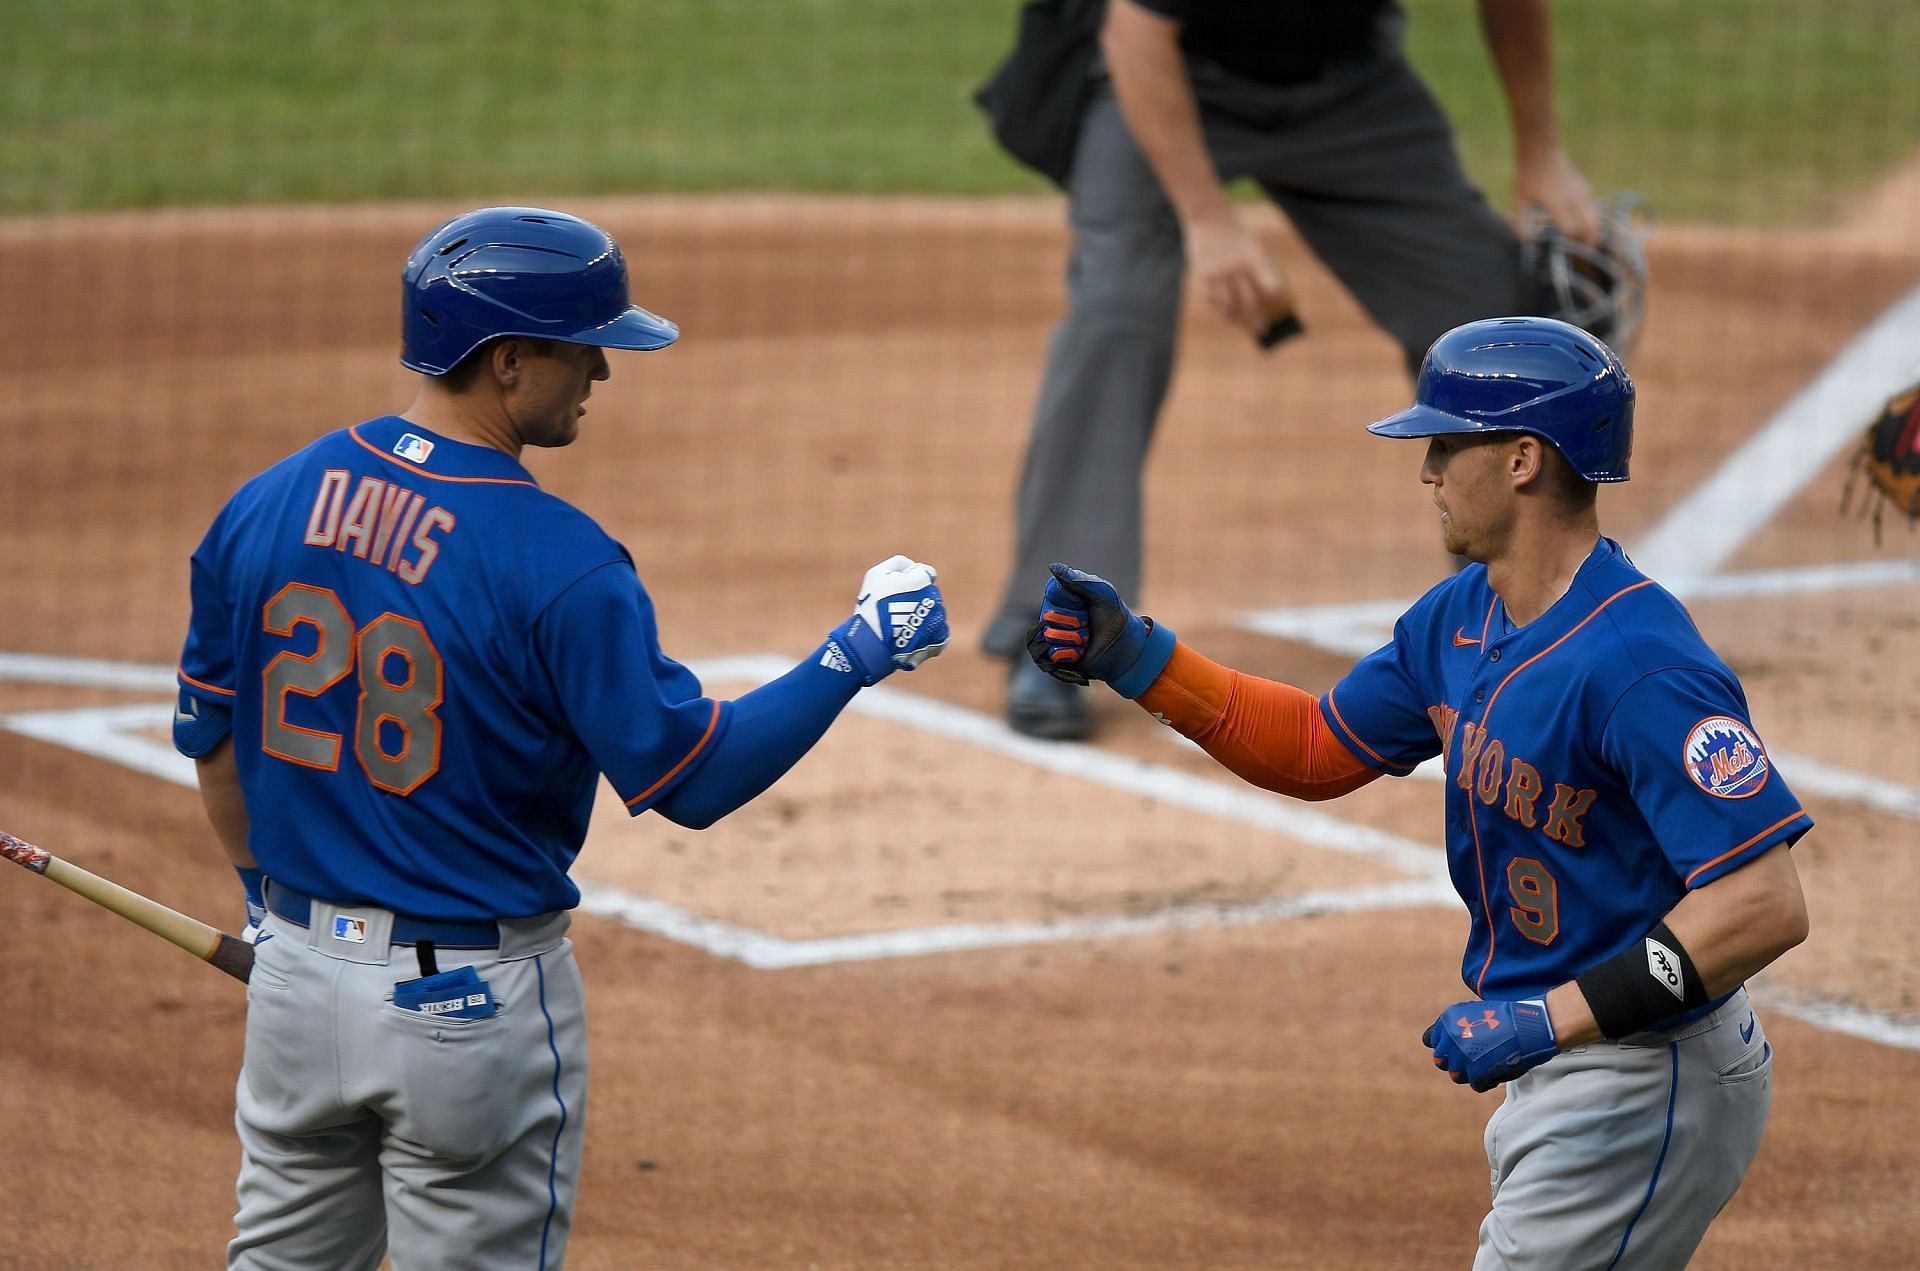 Rumors are that J.D. Davis and Brandon Nimmo of the New York Mets are also unvaccinated